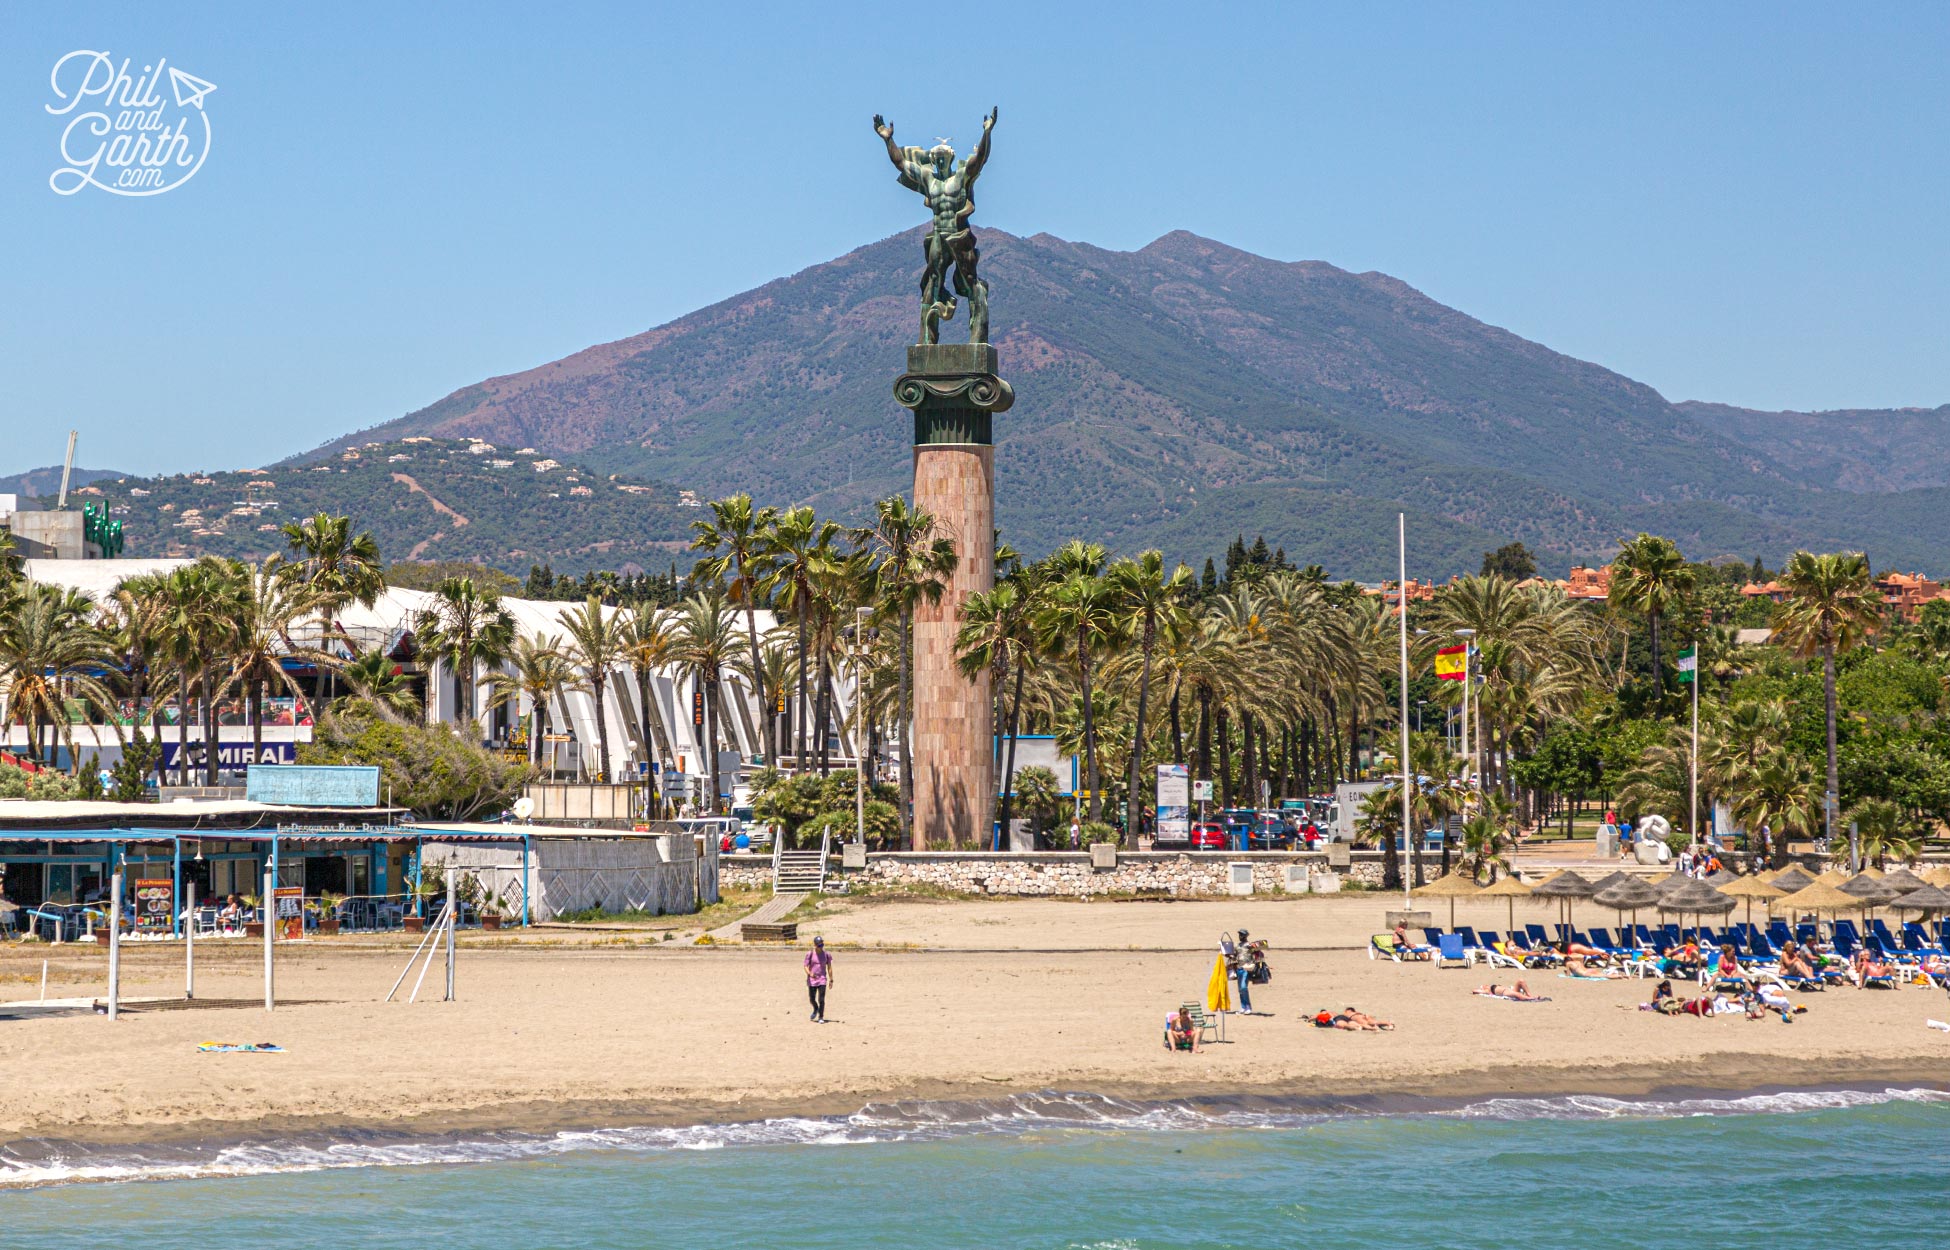 Walk from Marbella's city centre to Puerto Banus along the 'Golden Mile'